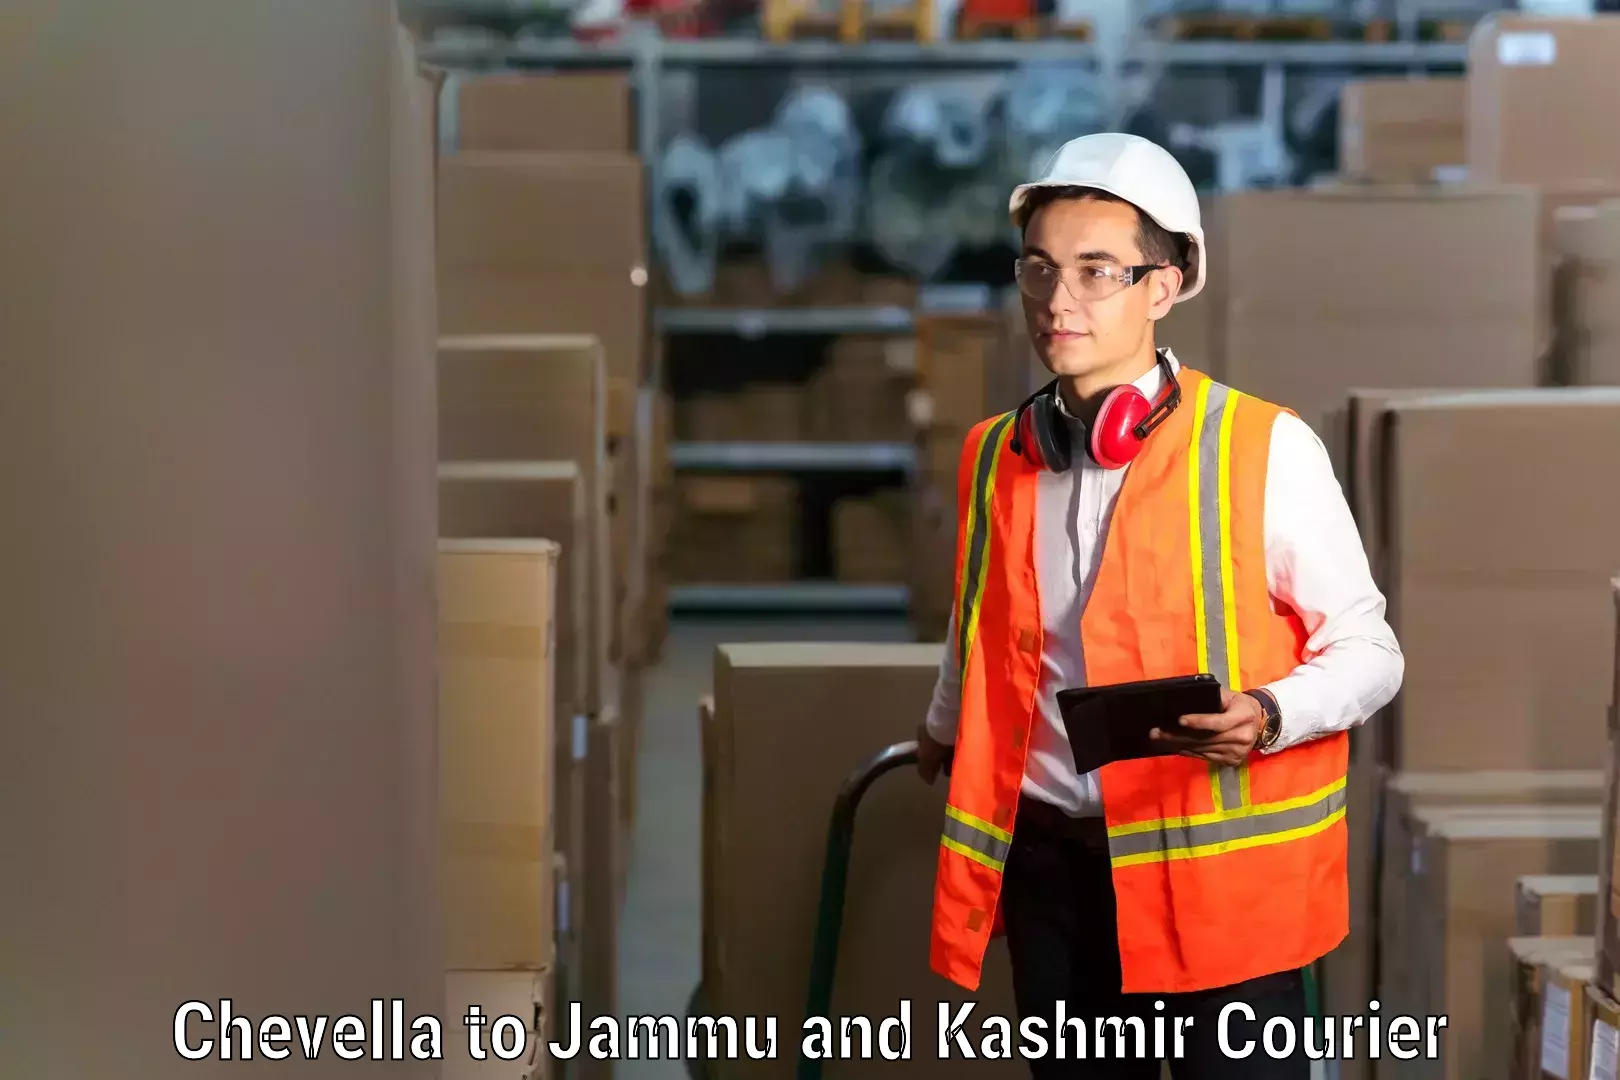 Quality relocation assistance Chevella to Budgam